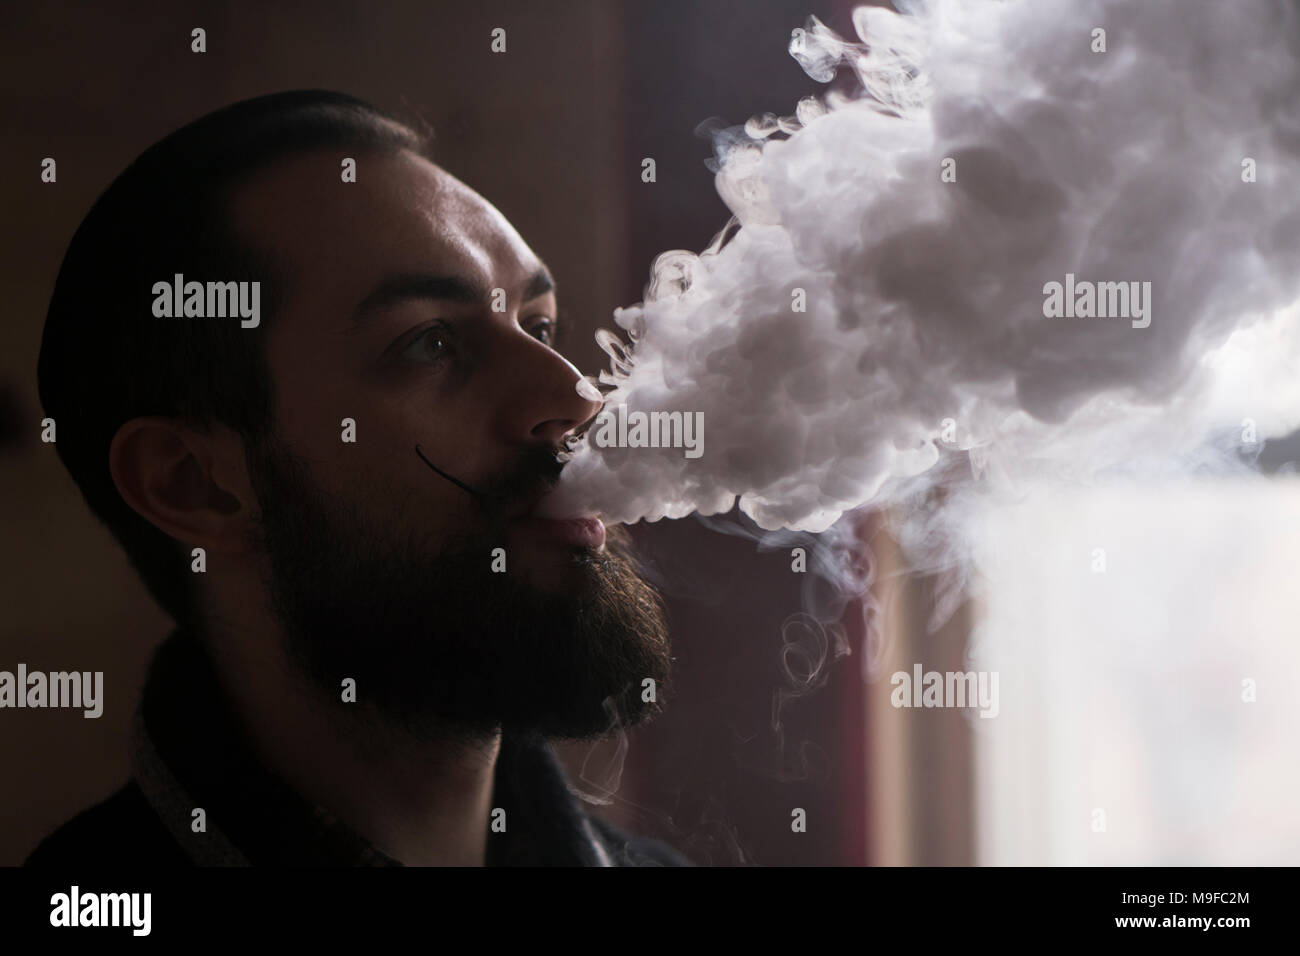 Man with Beard and Mustages Vaping an Electronic Cigarette. Vaper Hipster Smoke Vaporizer and Exhals Smoke Cloud. Stock Photo